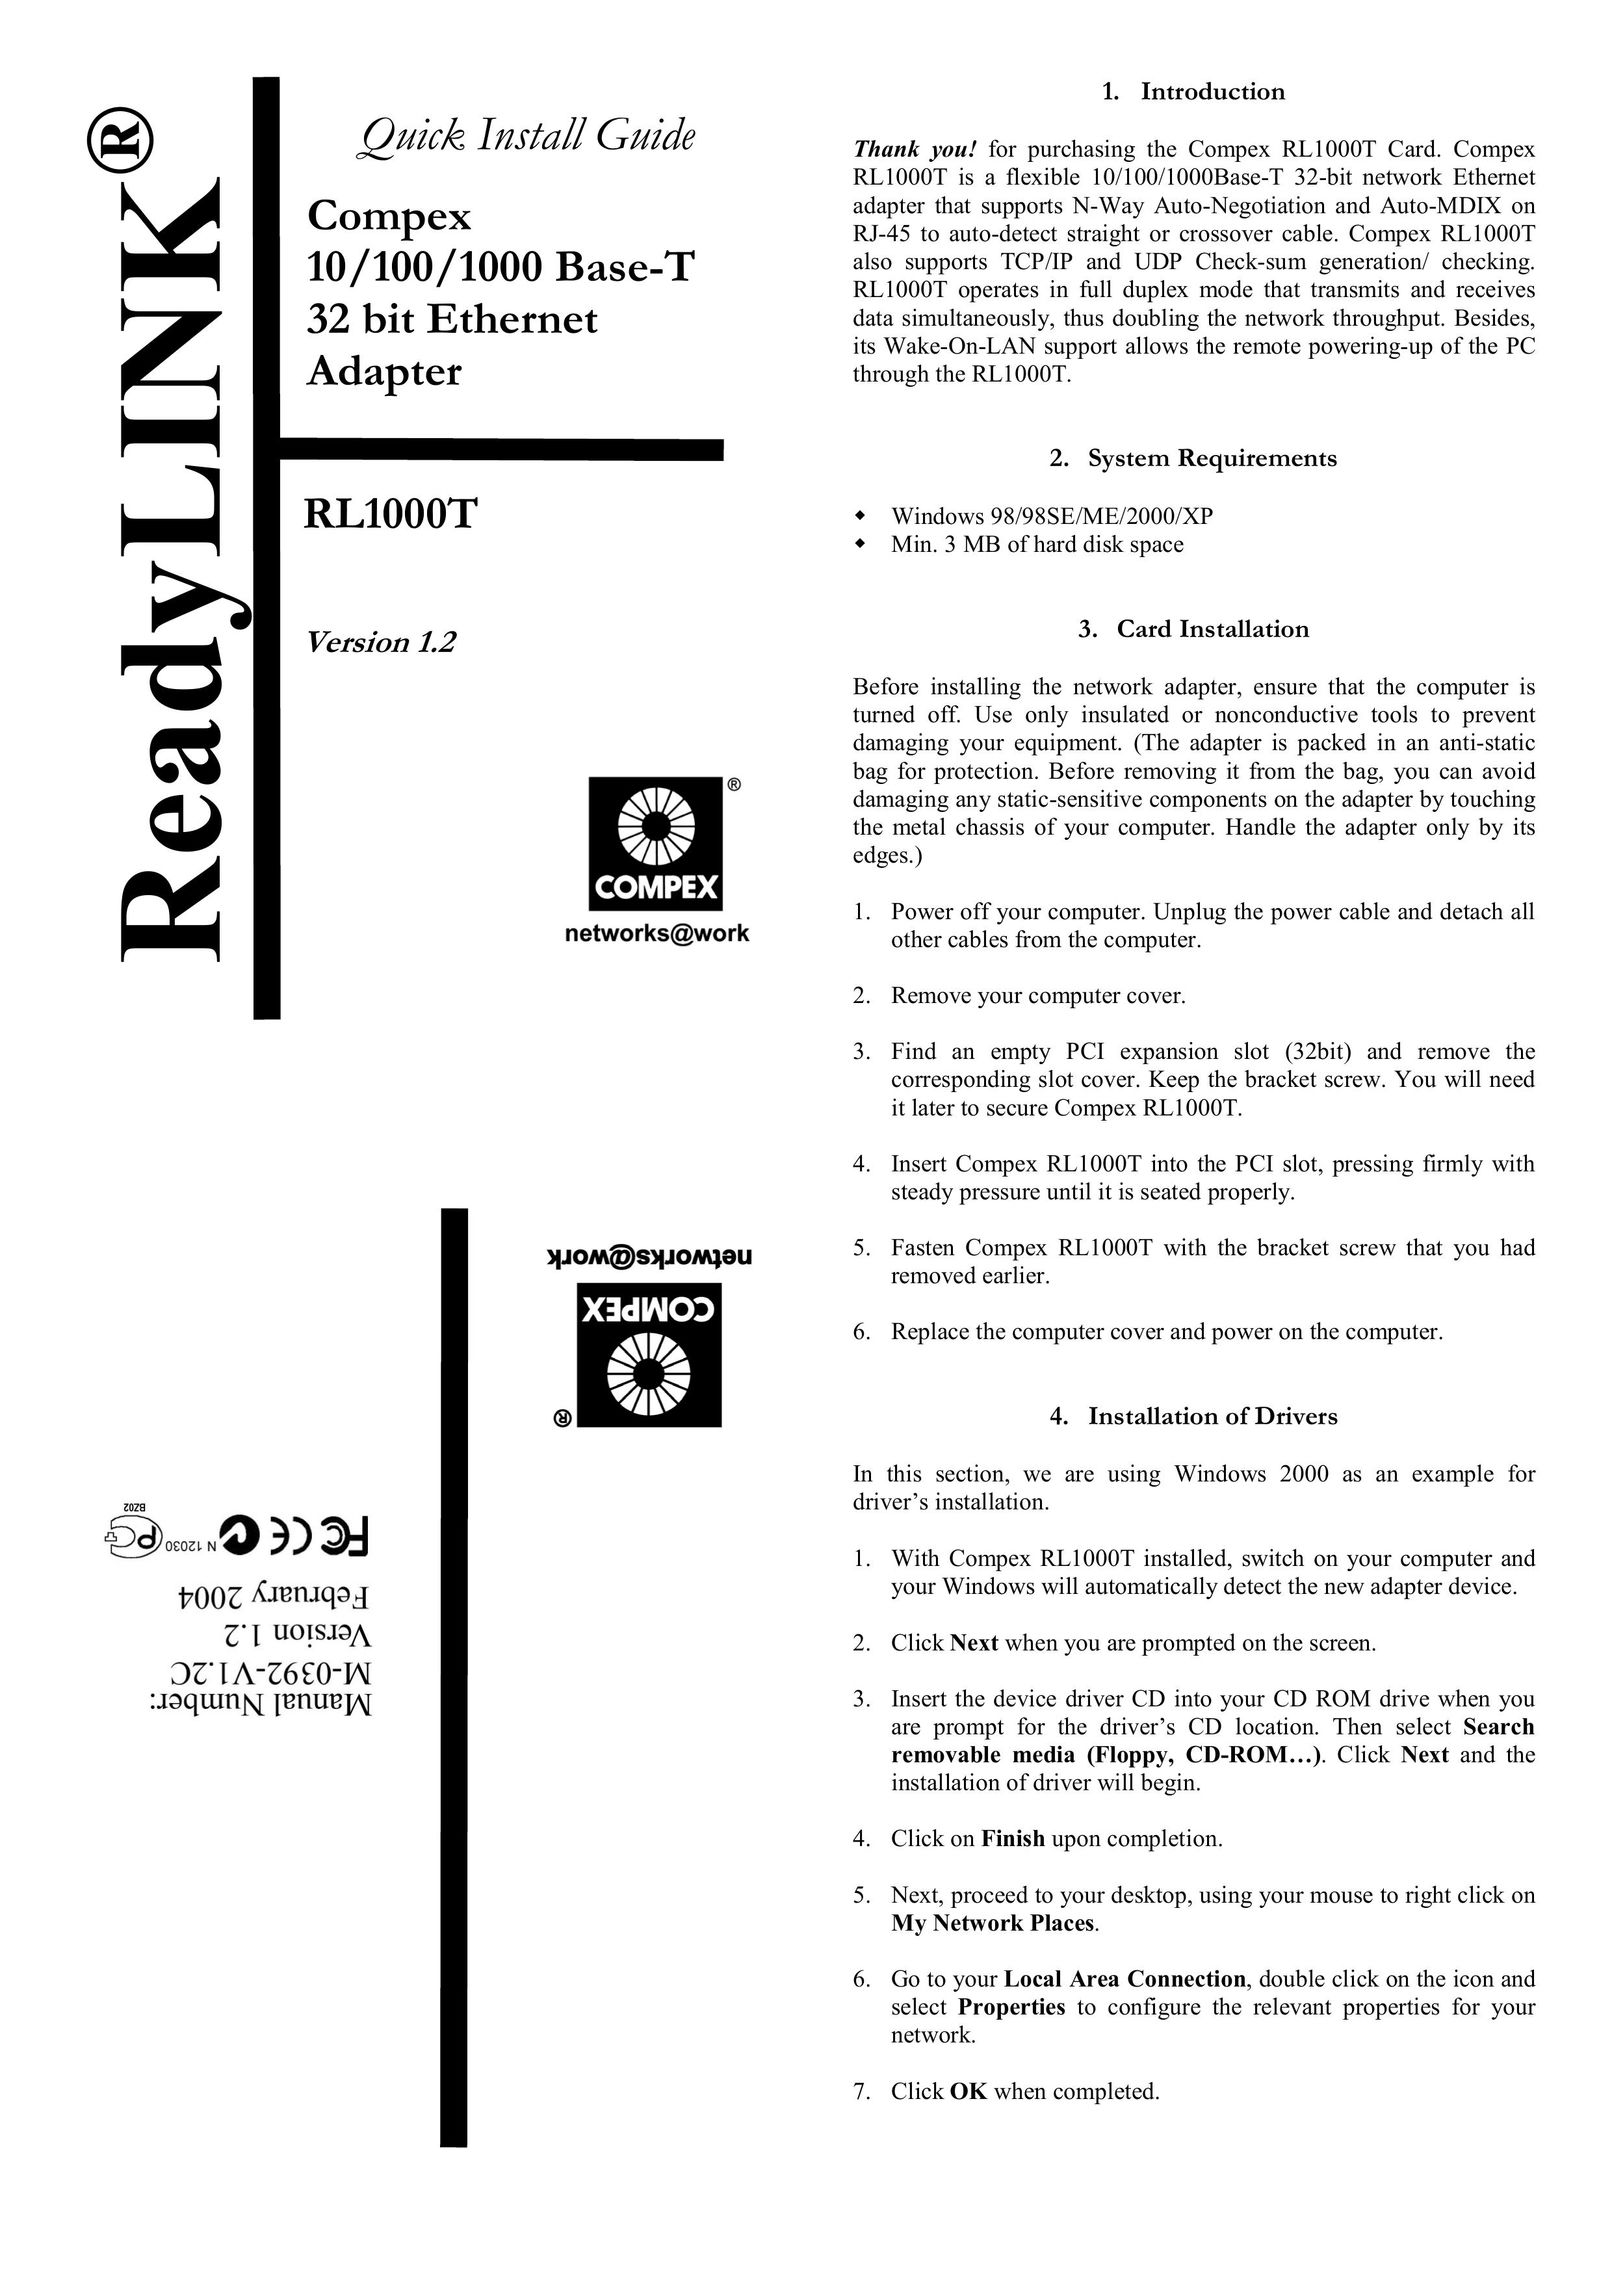 Compex Systems RL1000T Network Card User Manual